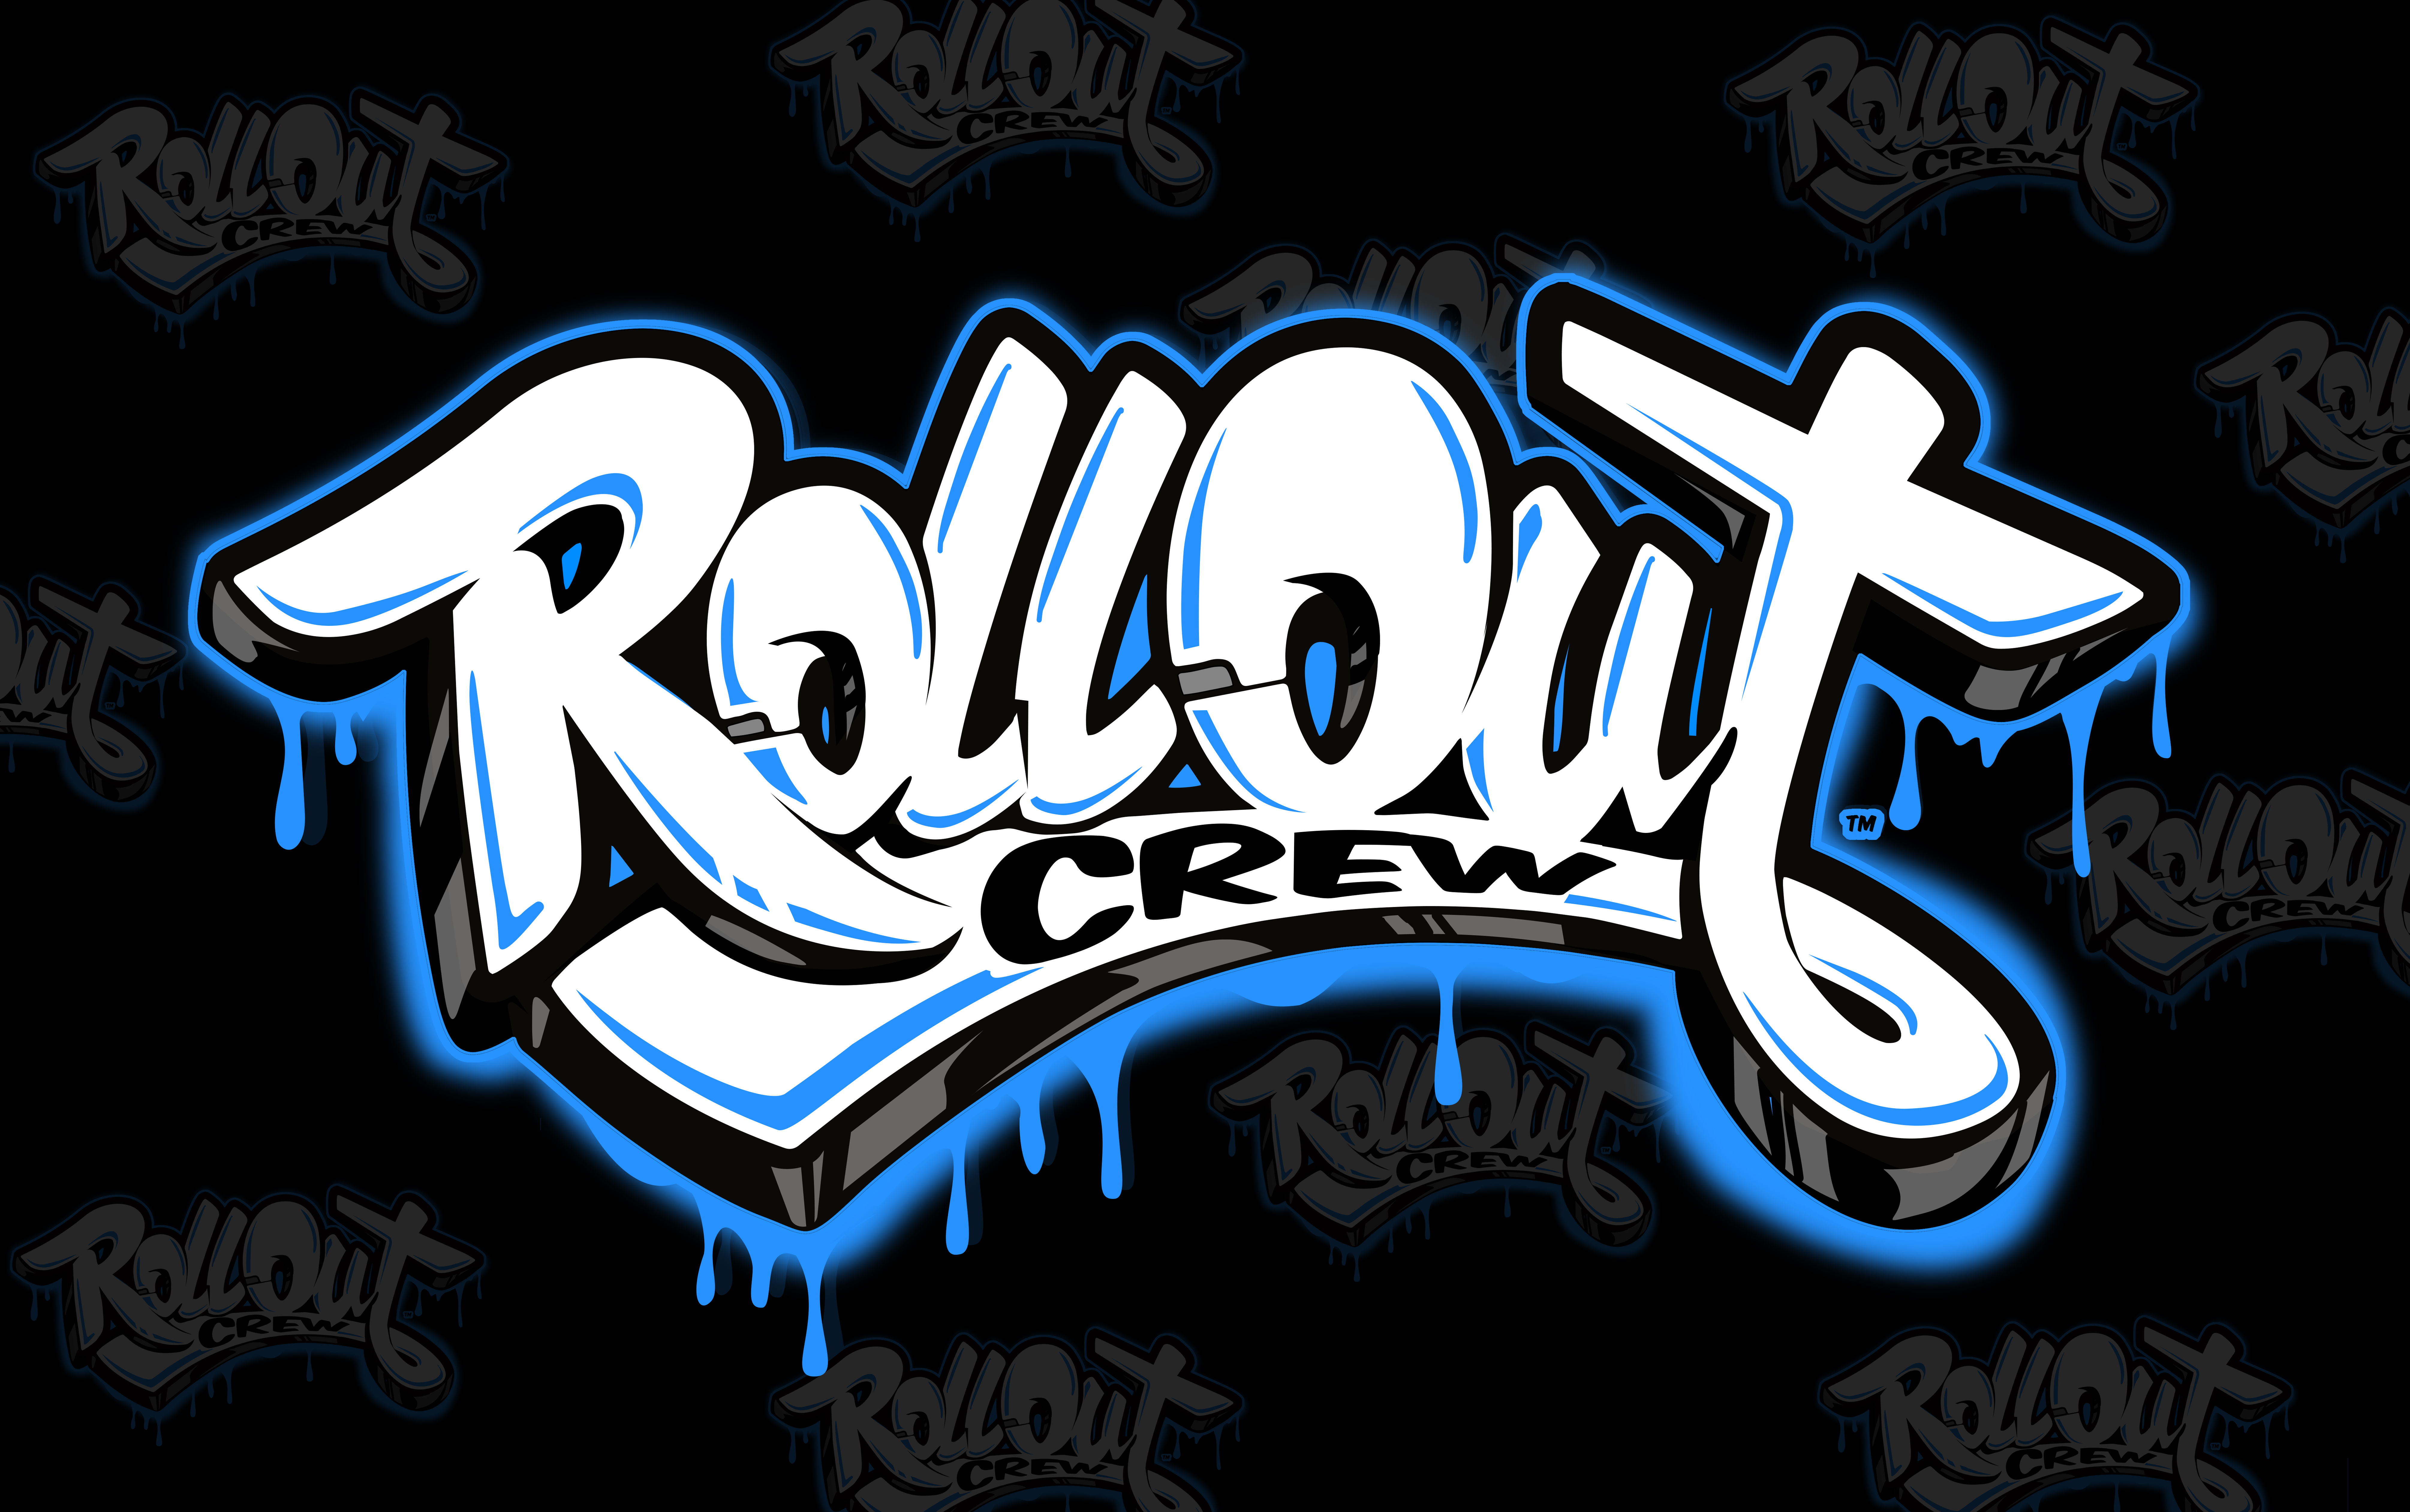 Roll Out Crew - Black Studies Collaboratory Small Grants Program